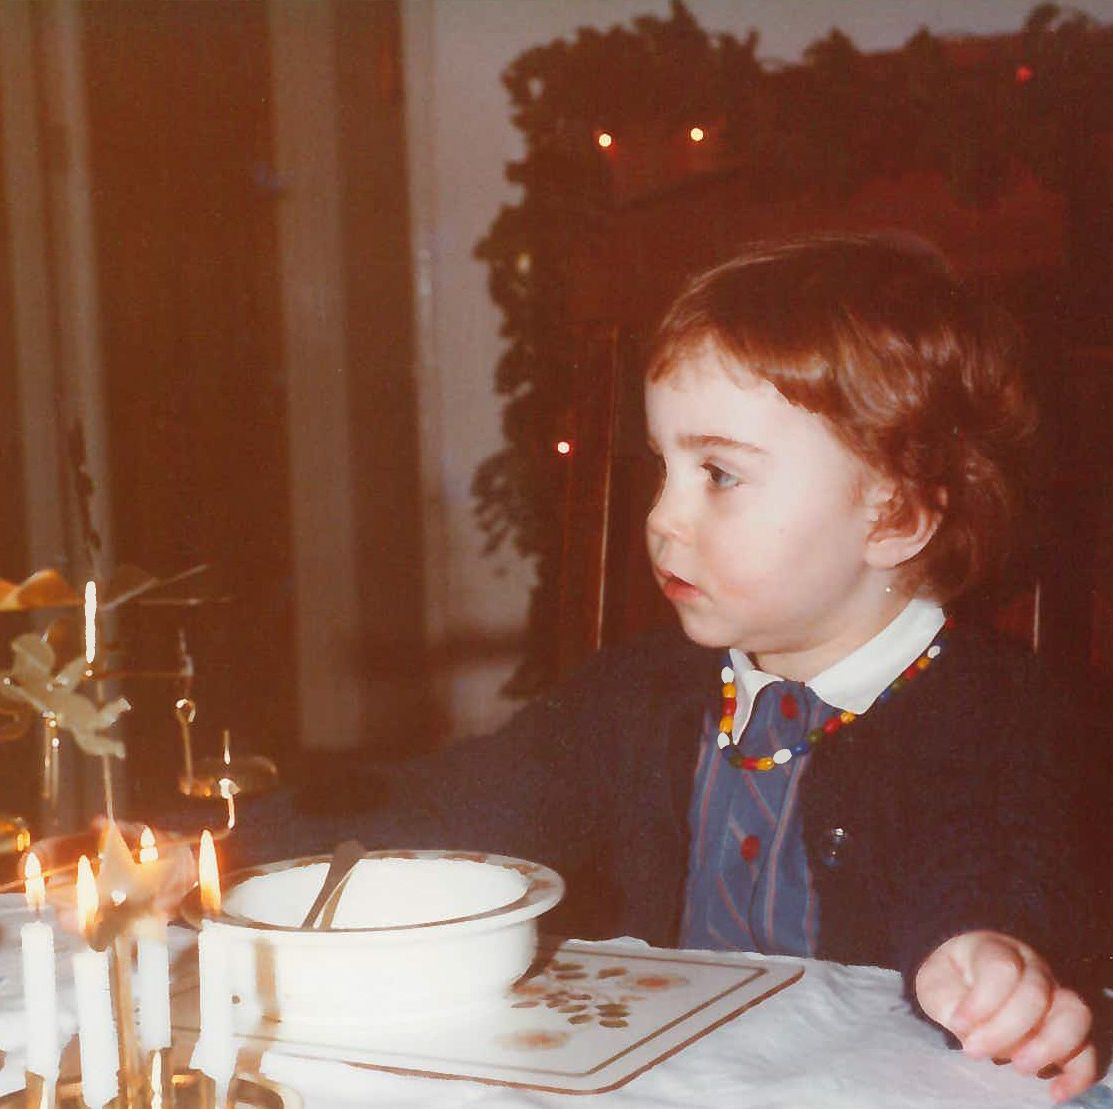 Kate Middleton Just Shared an Adorable, Never-Before-Seen Photo from Christmas 1983